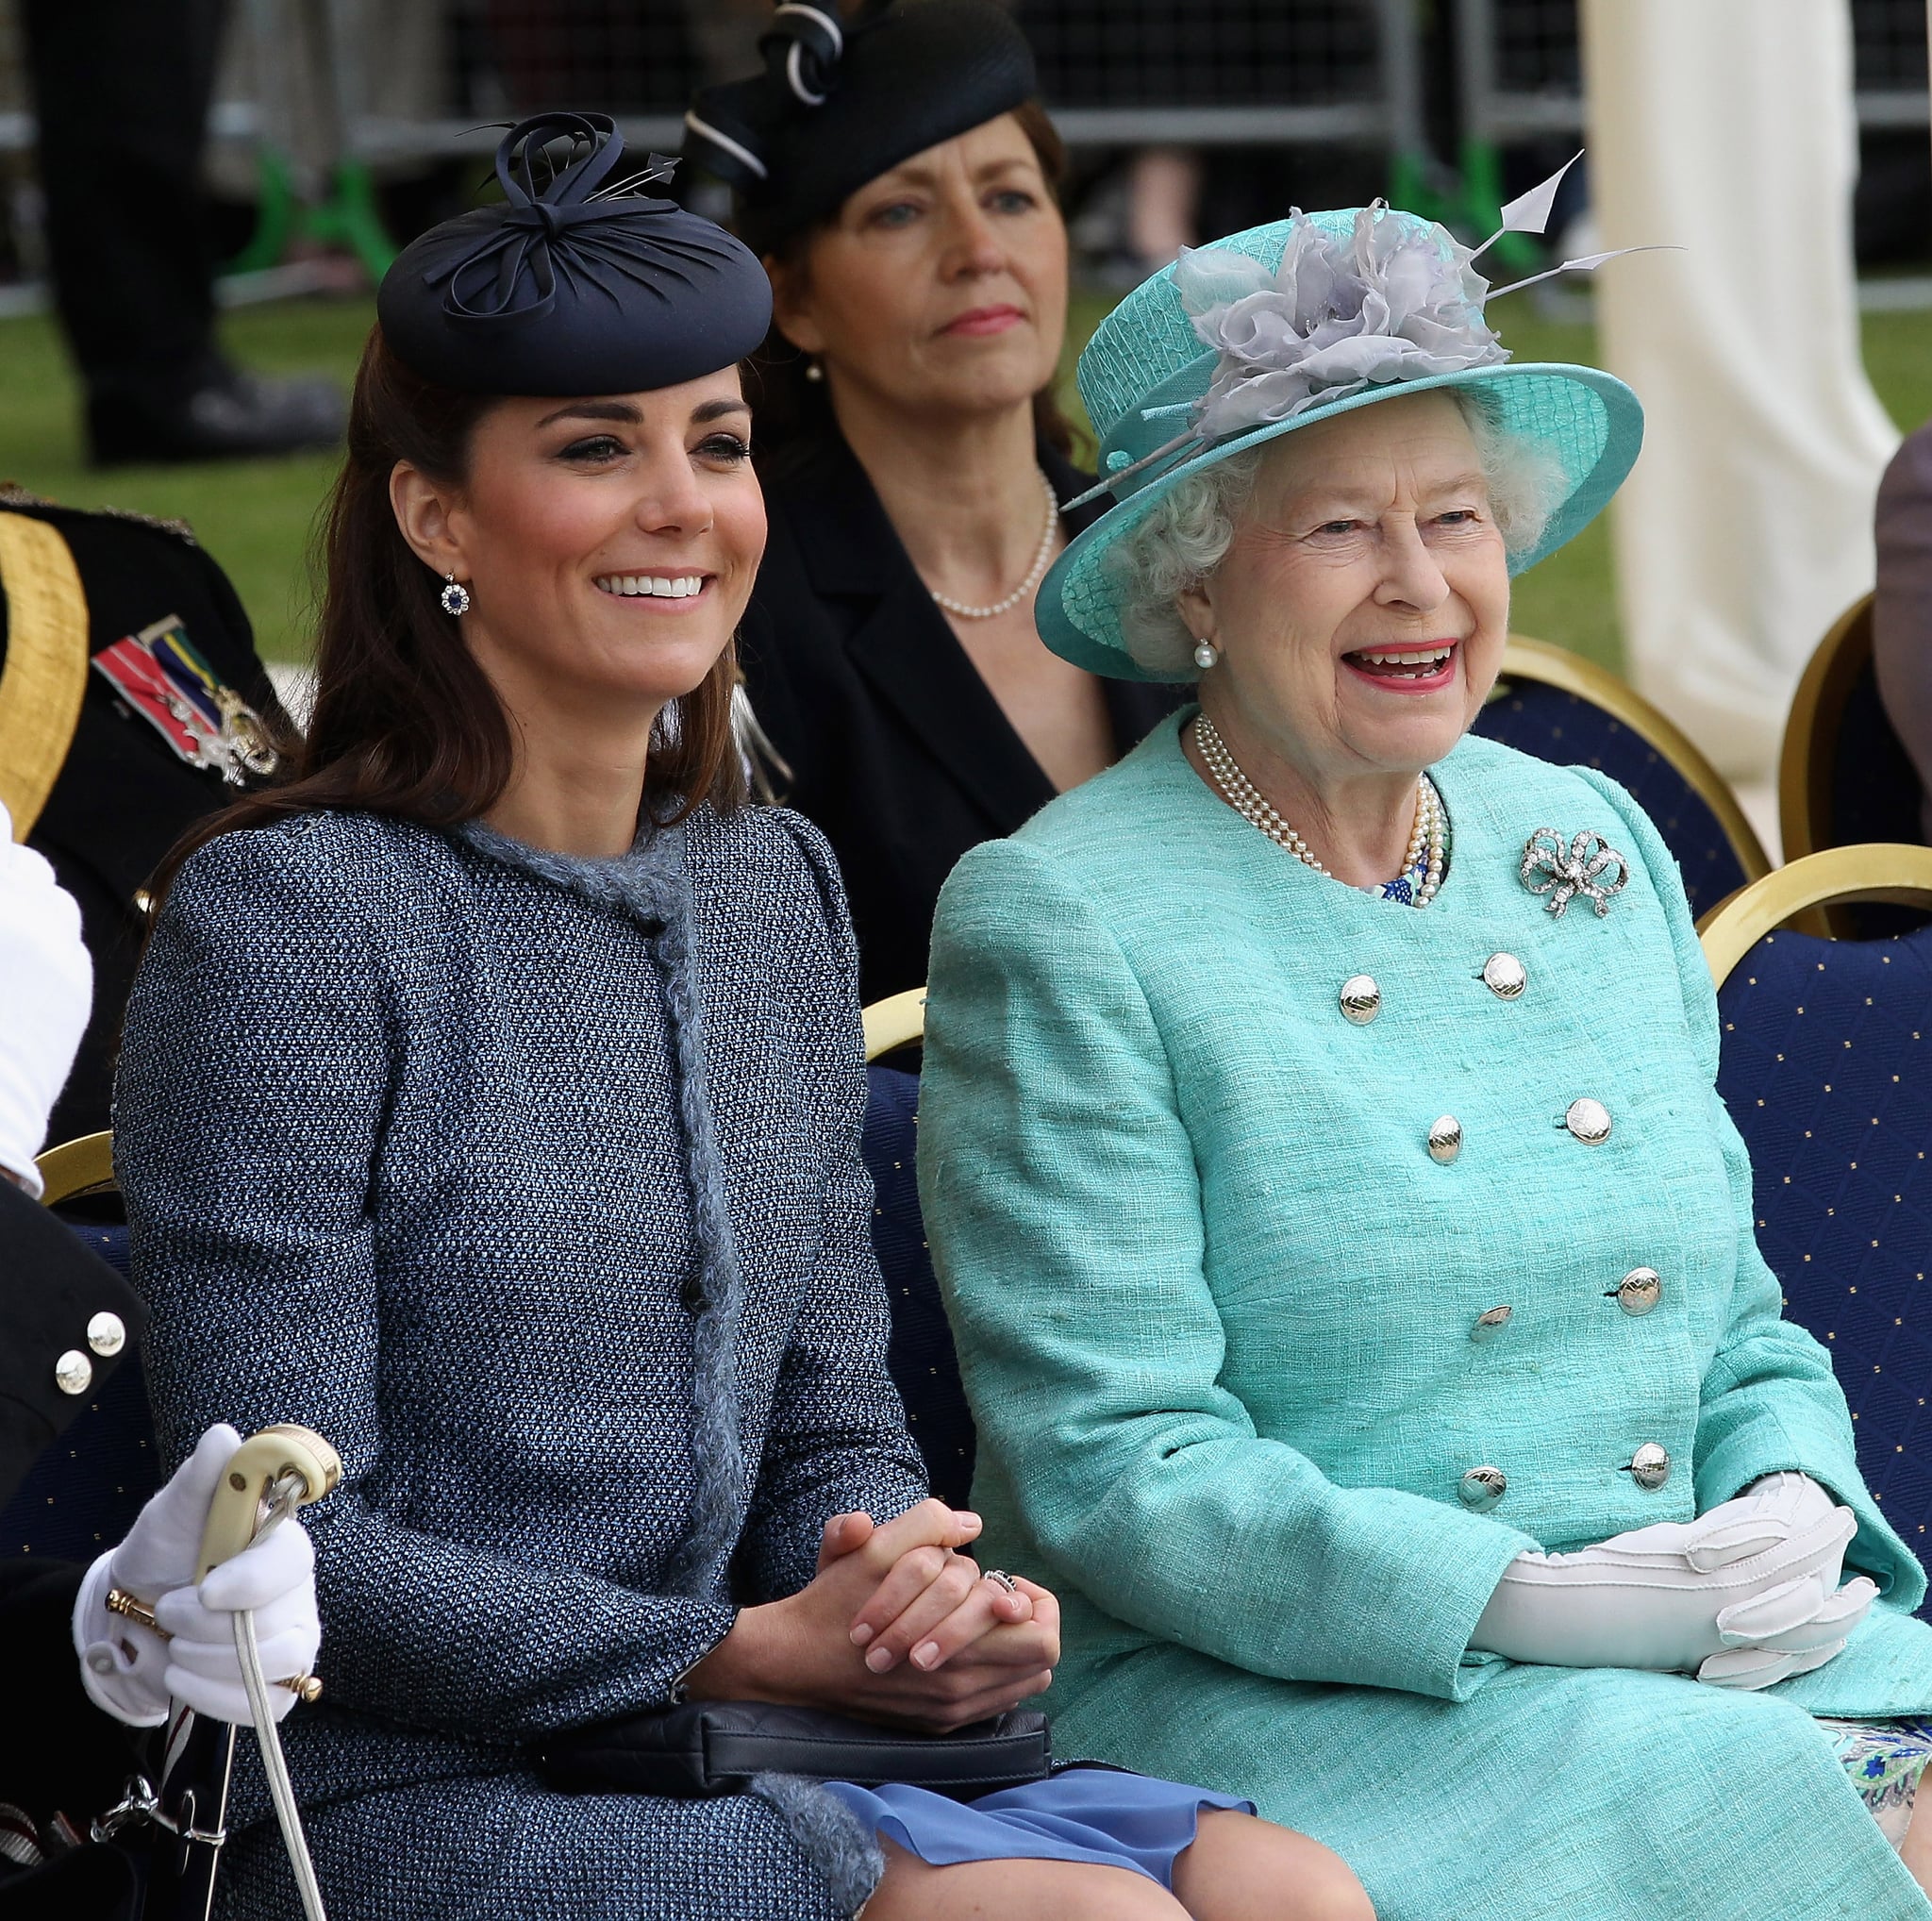 NOTTINGHAM, ENGLAND - JUNE 13:  Catherine, Duchess of Cambridge and Queen Elizabeth II smile as they visit Vernon Park during a Diamond Jubilee visit to Nottingham on June 13, 2012 in Nottingham, England.  (Photo by Chris Jackson/Getty Images)